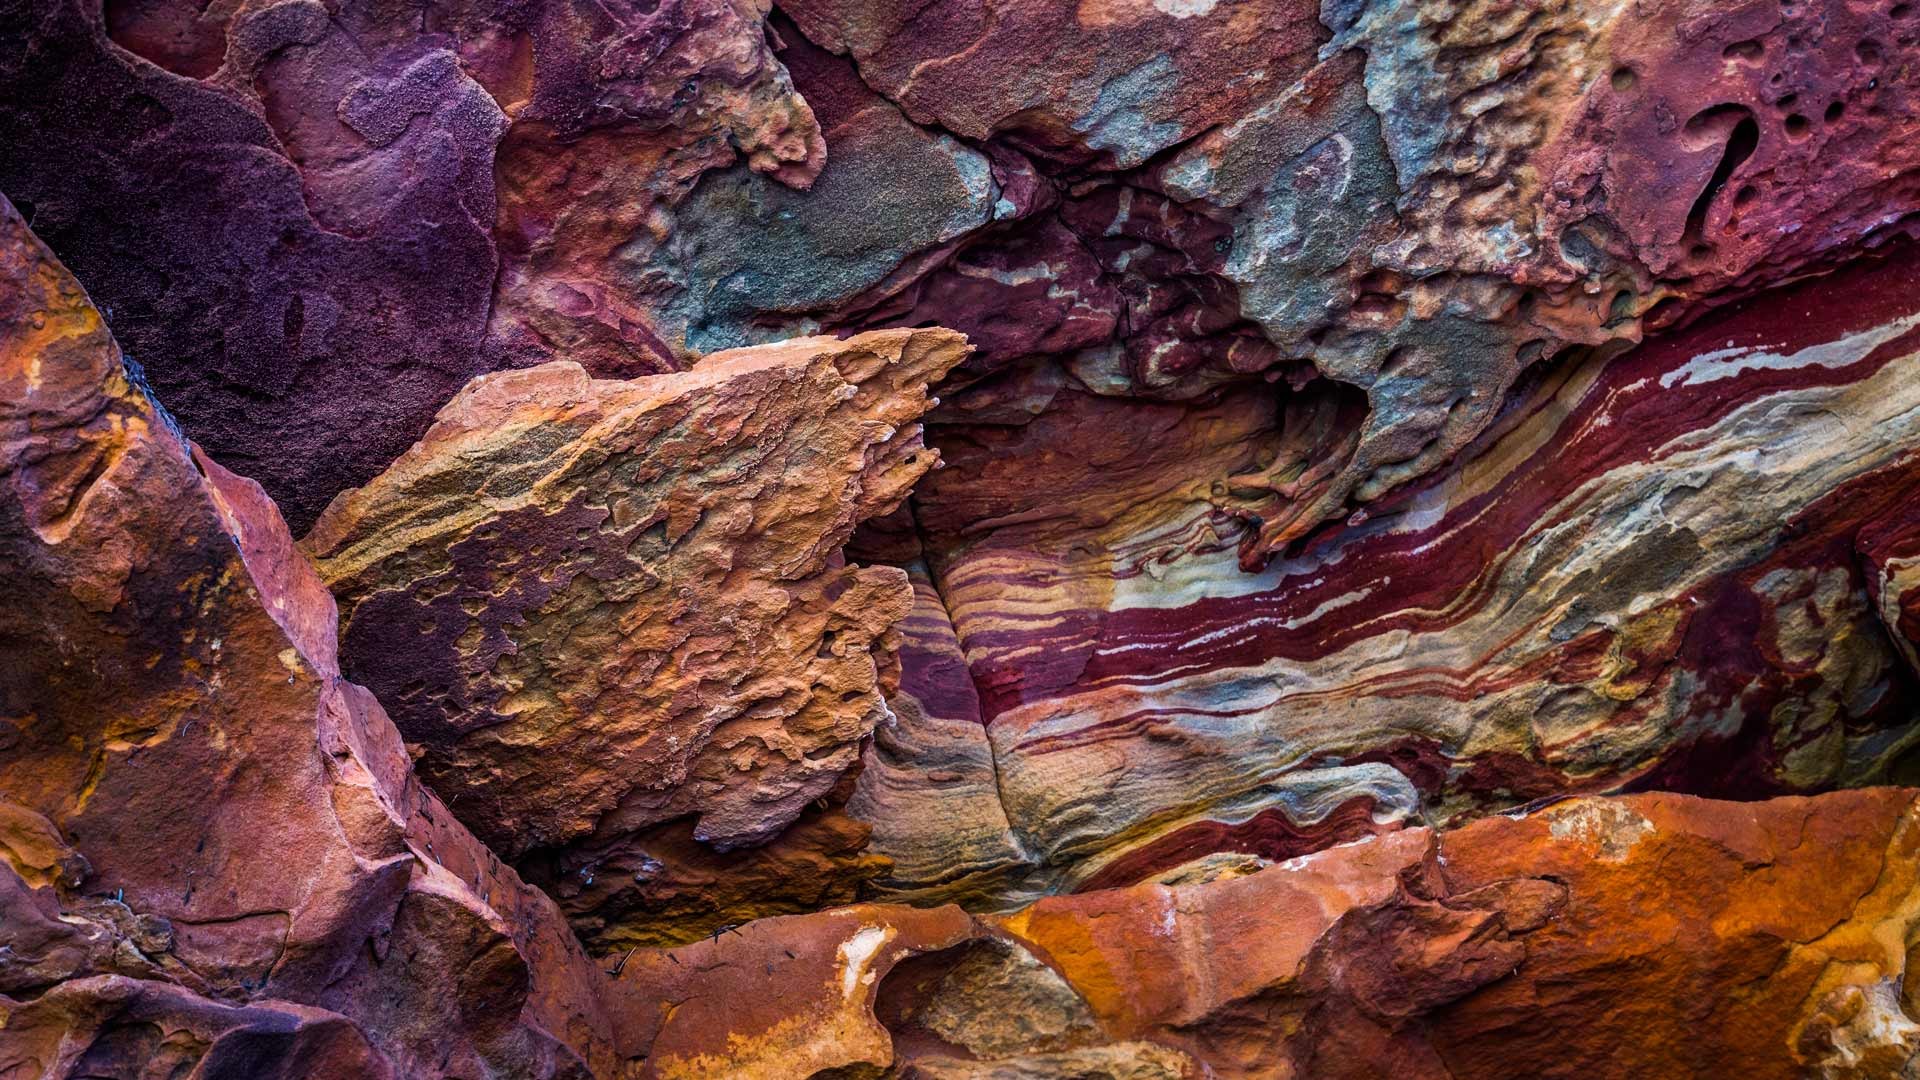 General 1920x1080 abstract photography rocks nature colorful rock formation Australia national park